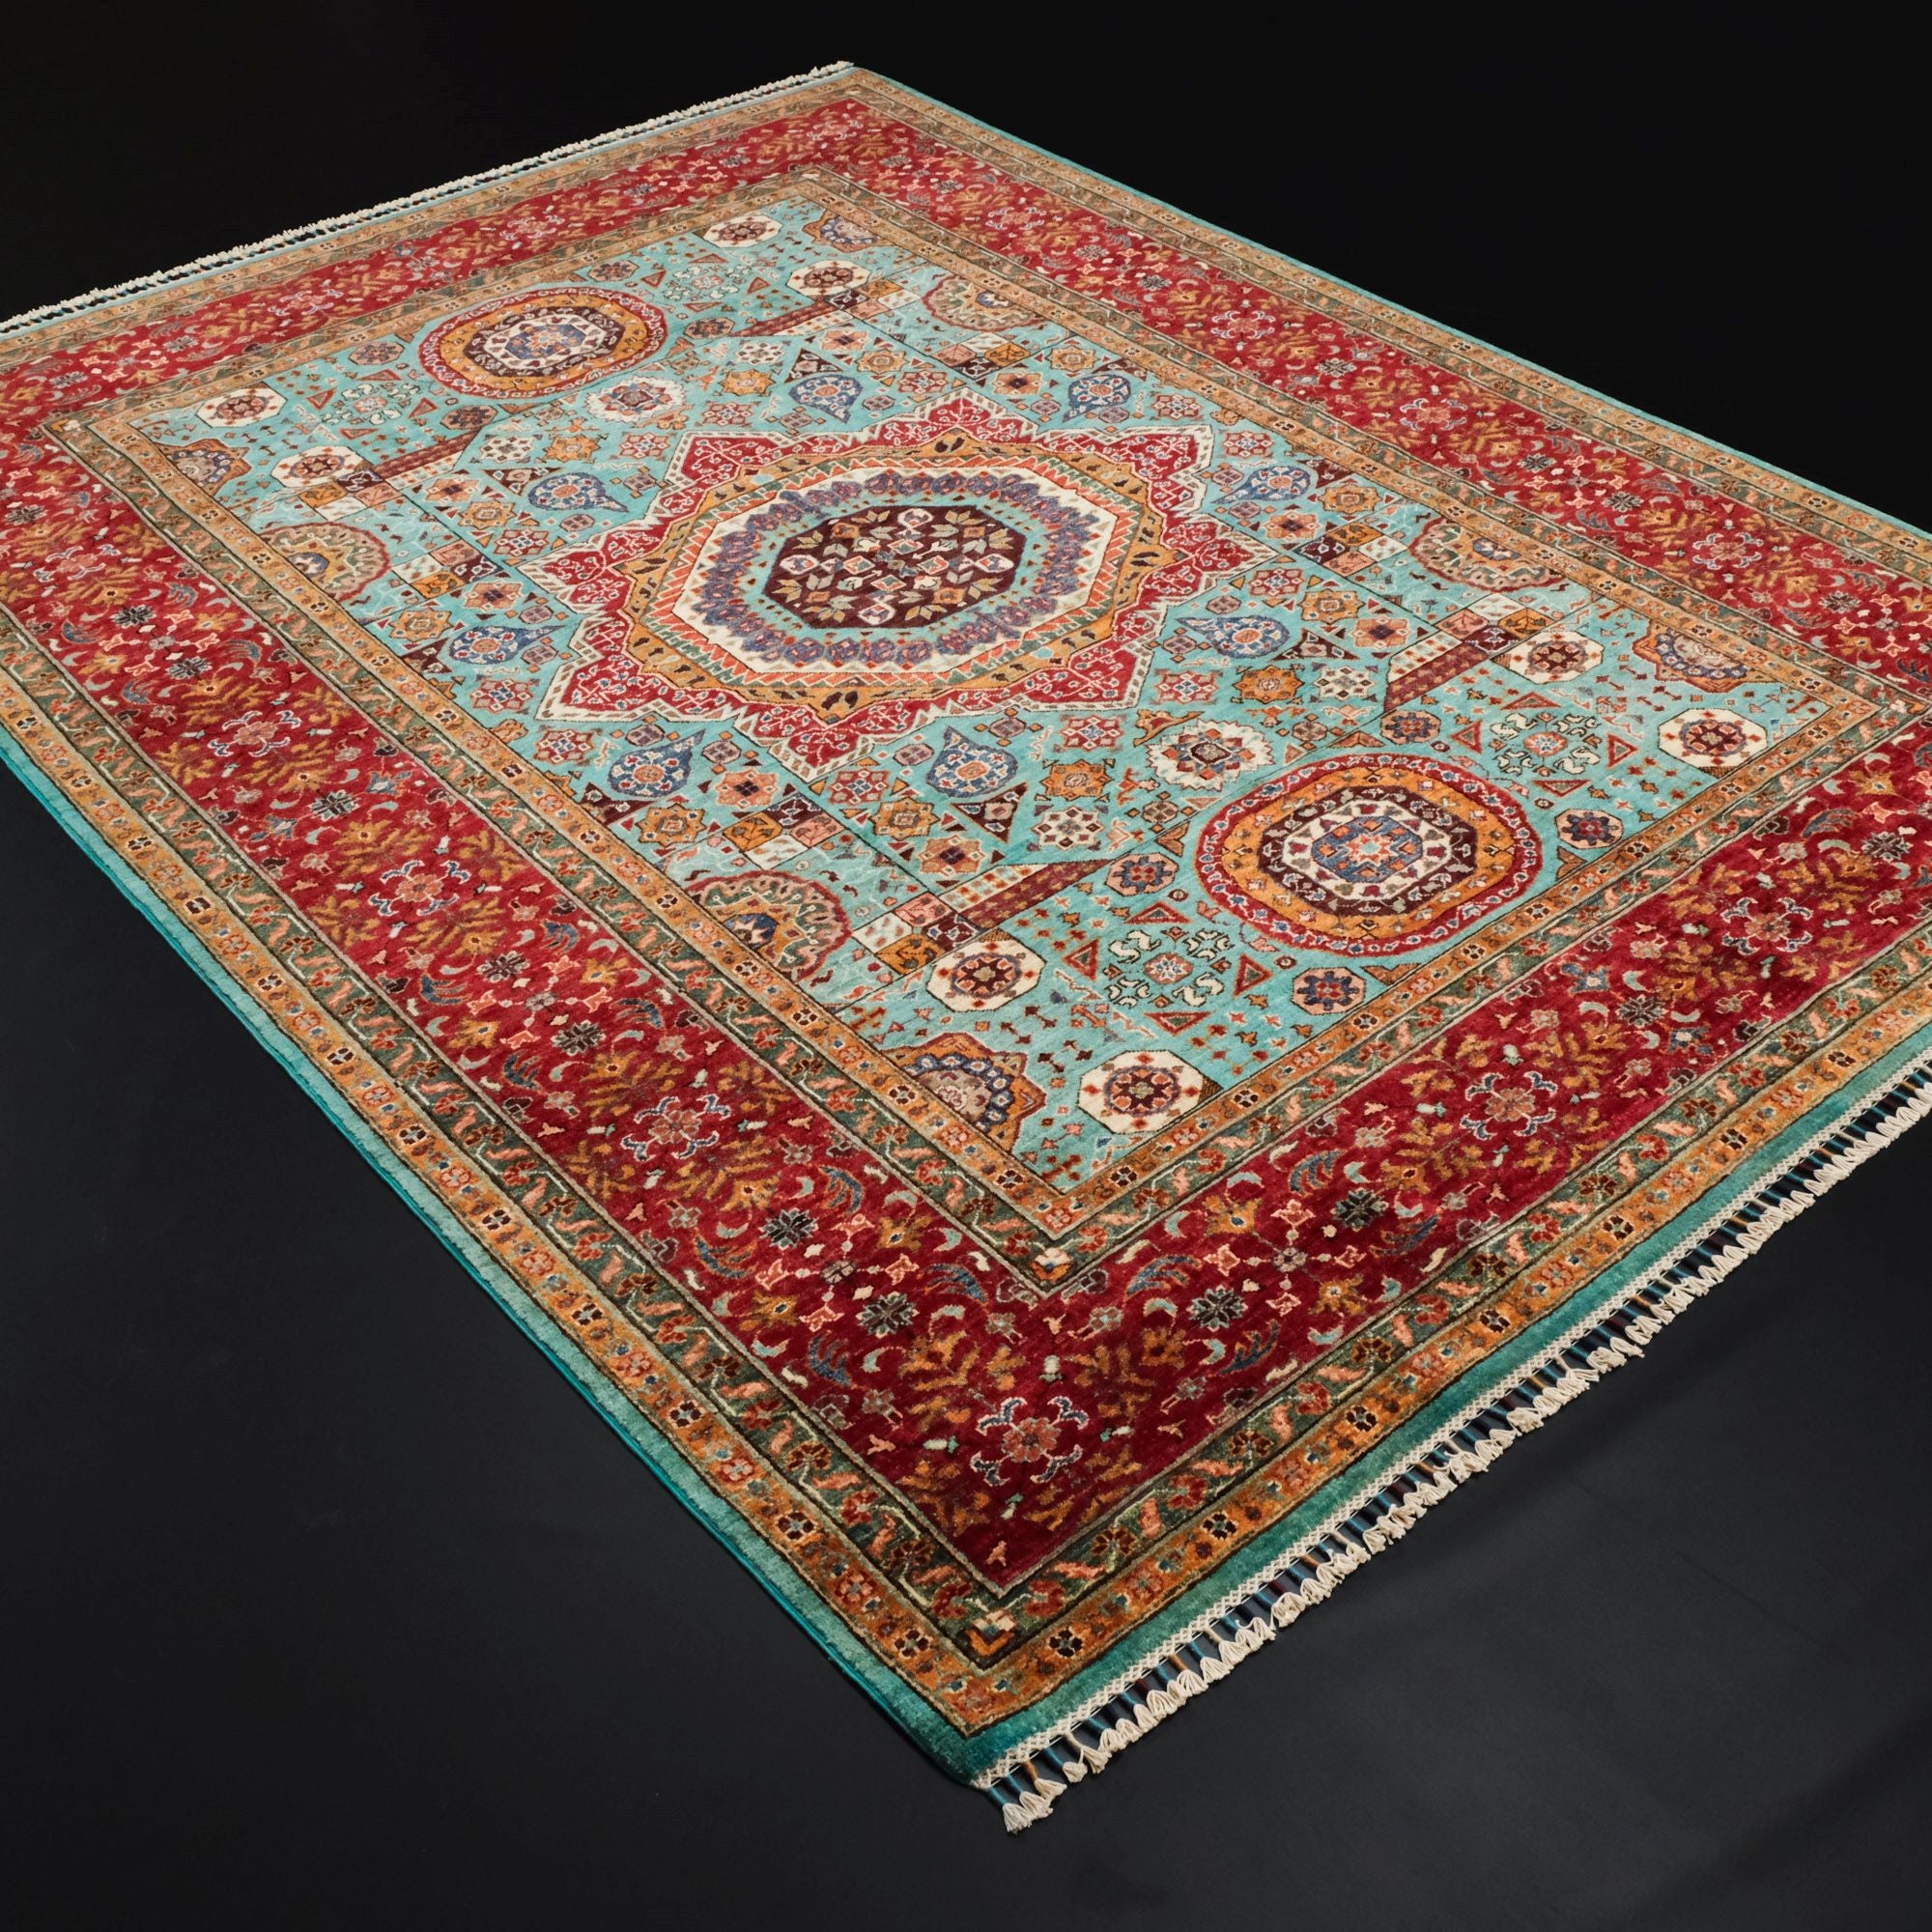 Shahzade Series Hand-Woven Mamluk Patterned Colorful Wool Carpet